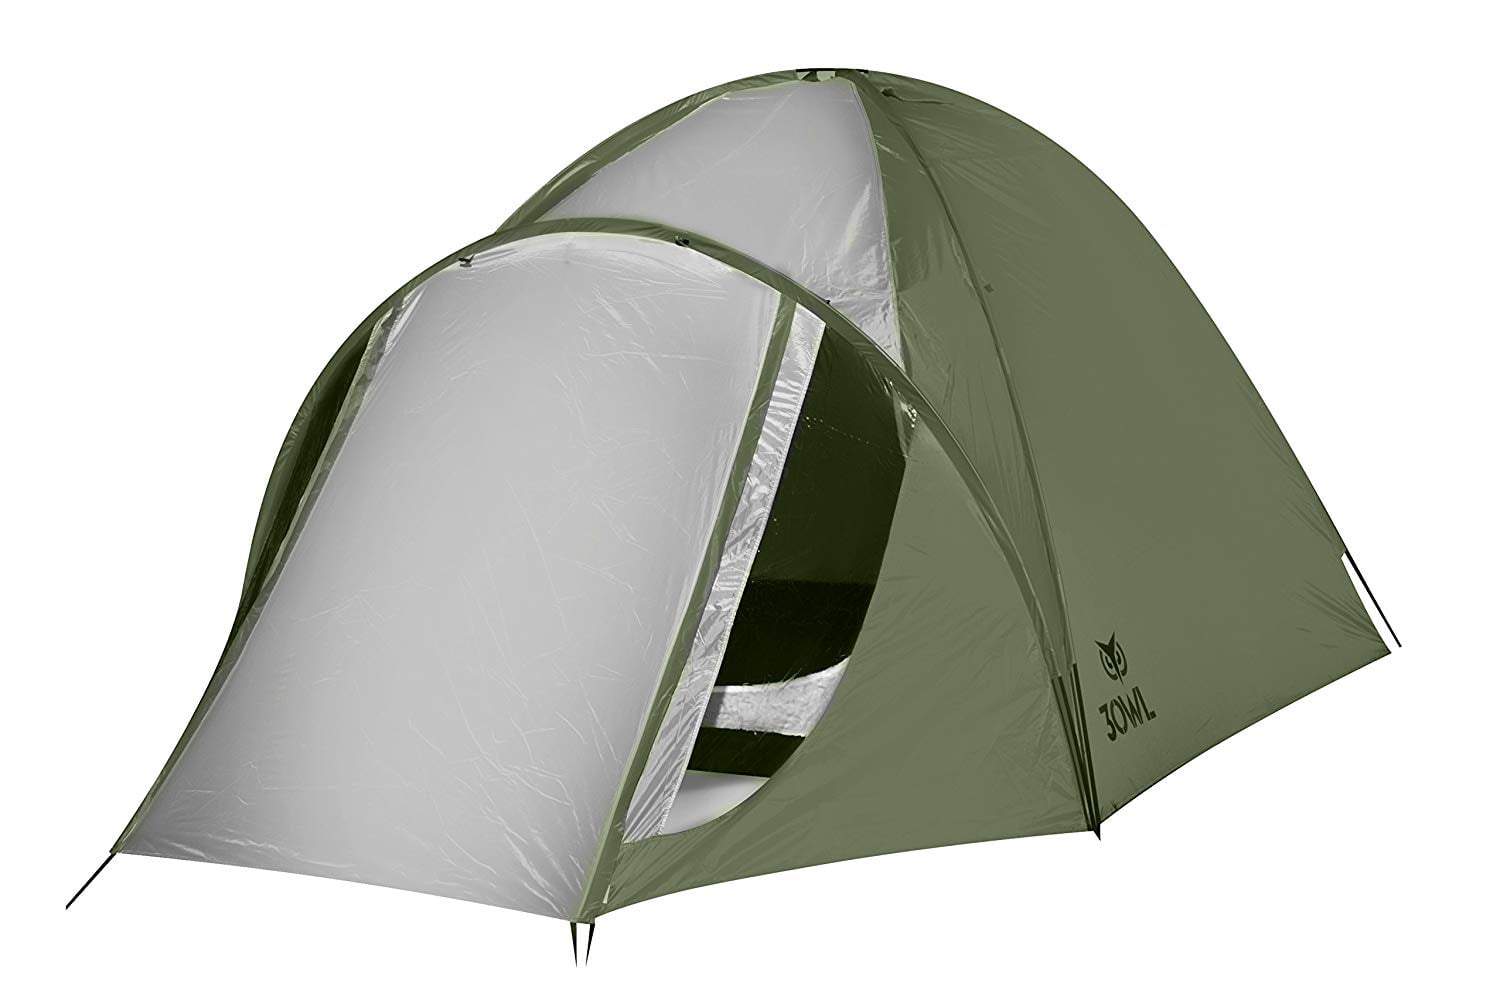 3OWL Everglades 5 Person Easy Setup Hiking， Camping， Outdoors Backpacking Green Tent